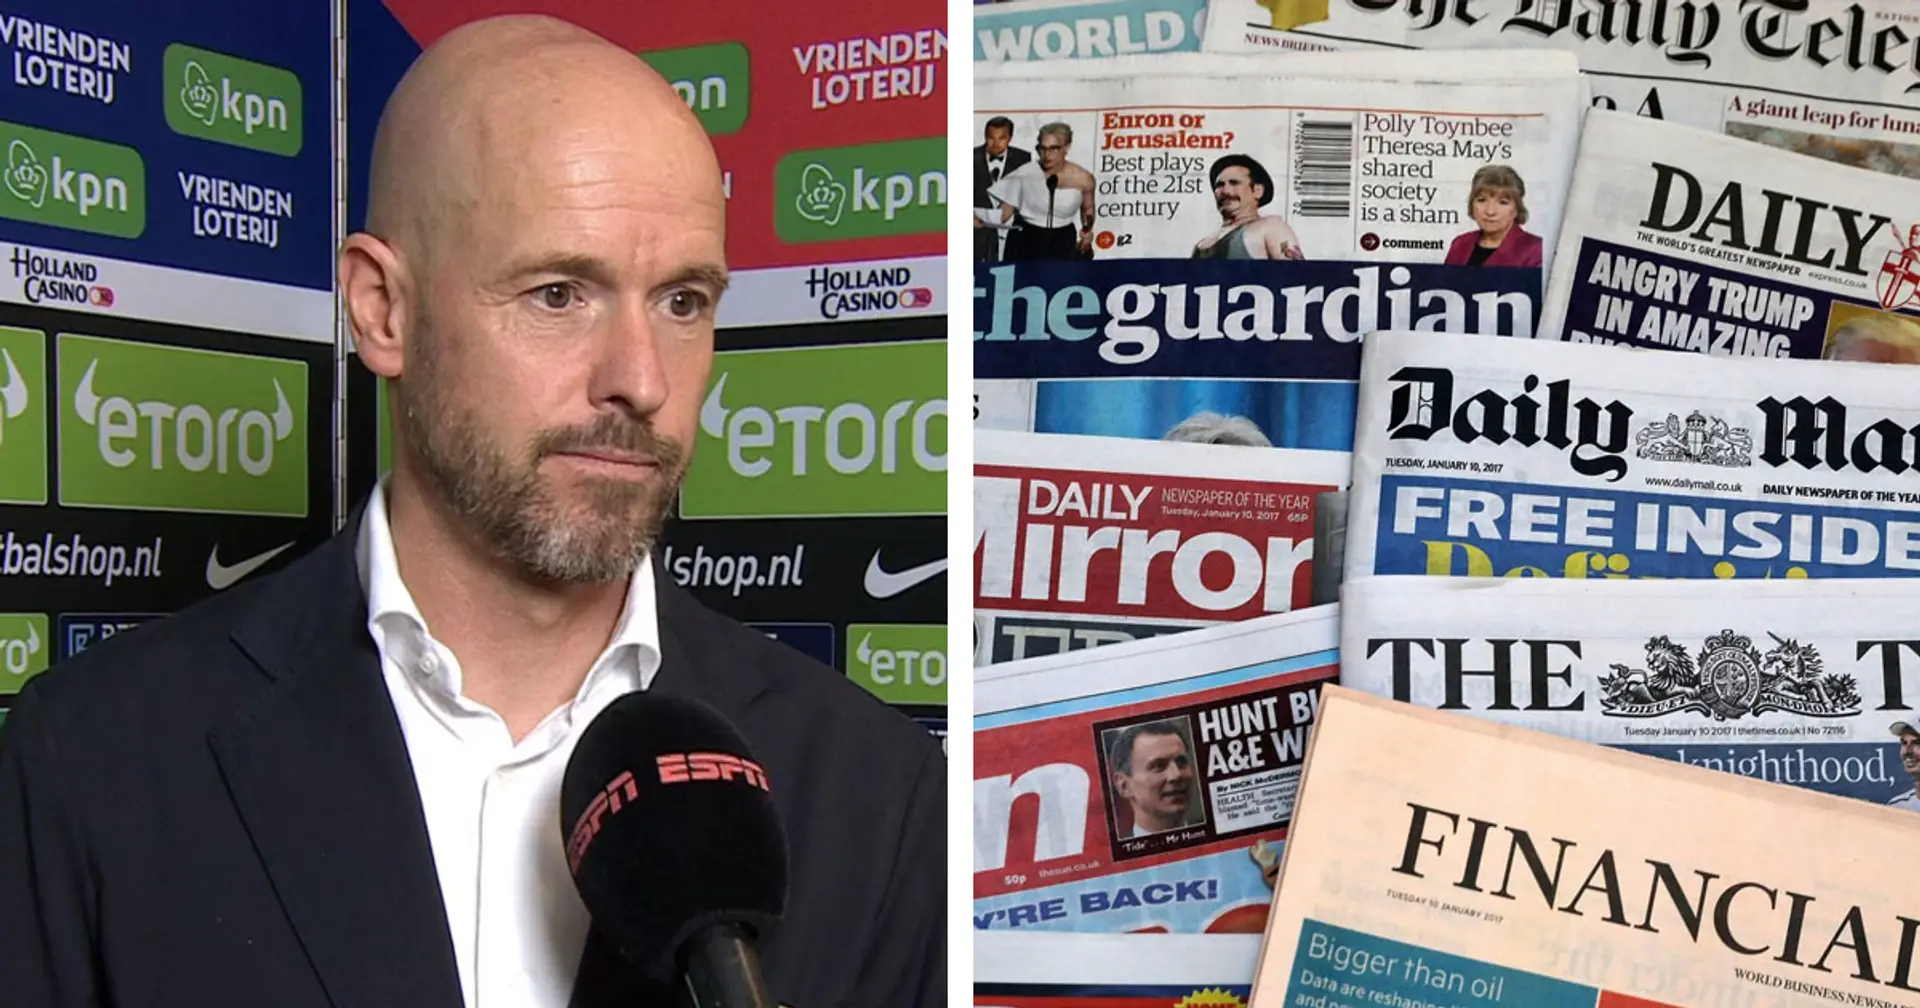 Ten Hag gives classy response to being asked if he's ready to 'deal with the sharks' in English media